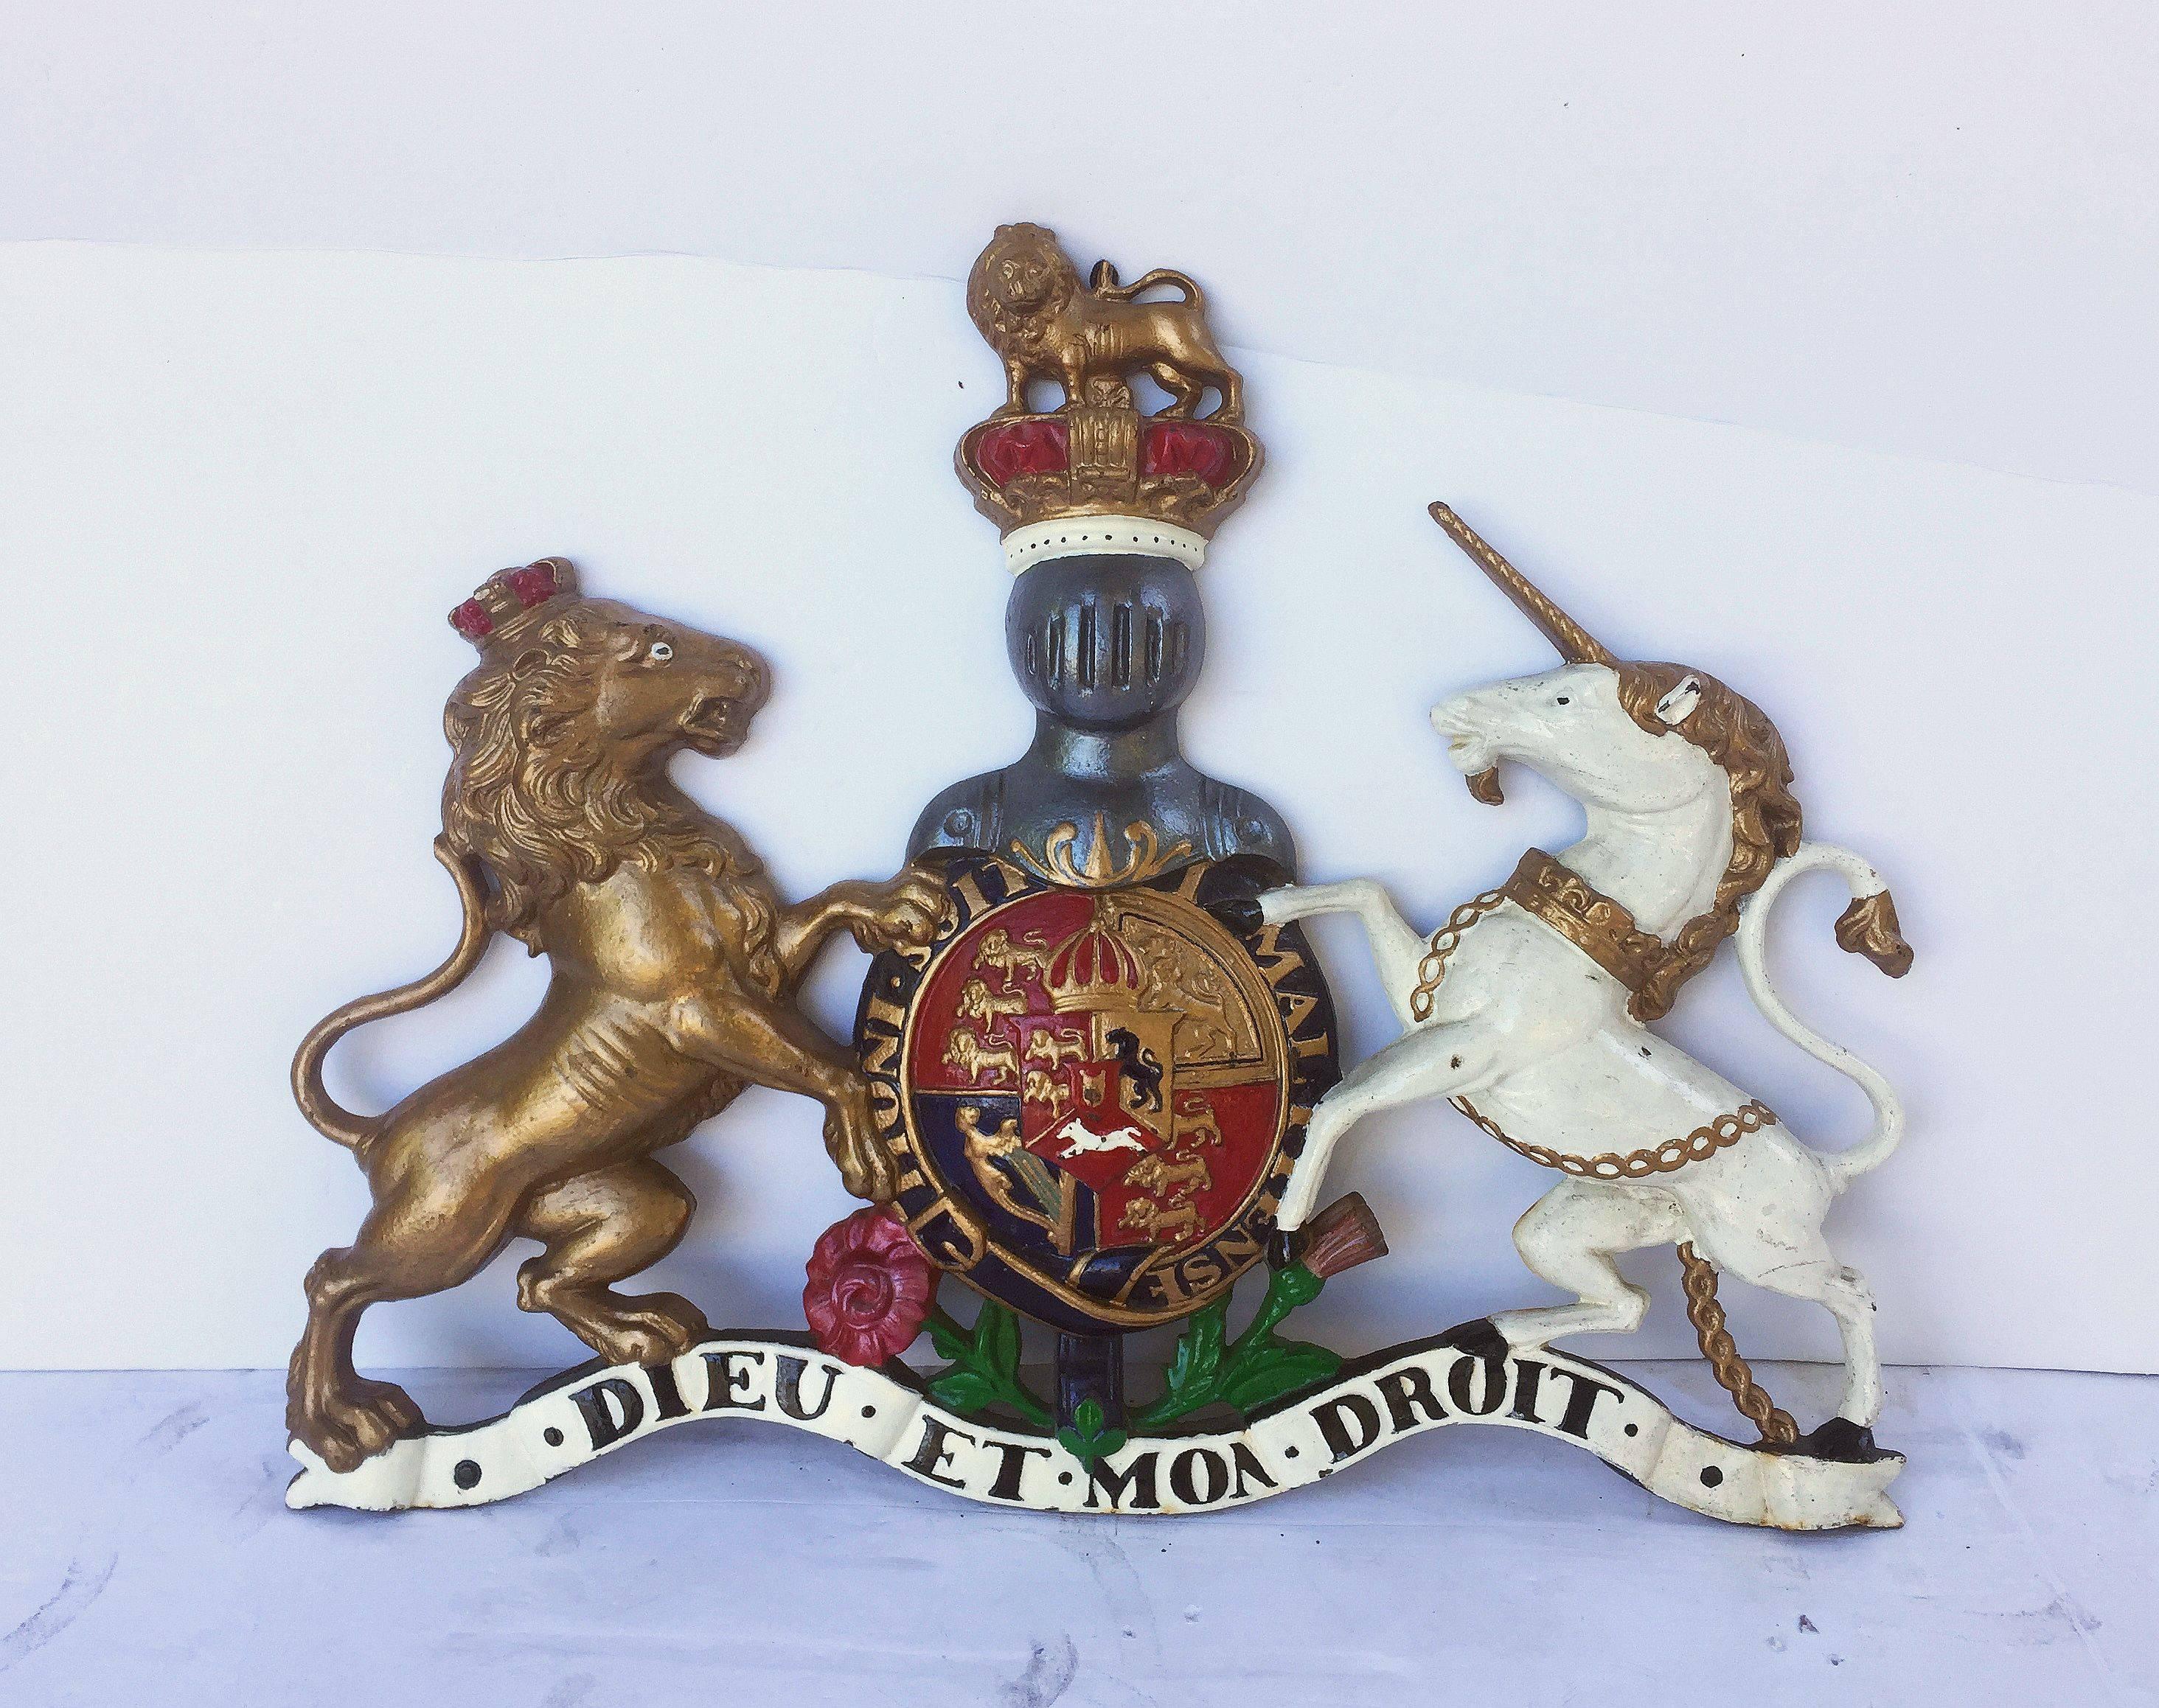 A vintage Royal Warrant crest from the early to mid-20th century, featuring the British Royal Coat of arms.

The coat features both the motto of English monarchs, Dieu Et Mon Droit (God and my right), and the motto of the order of the garter, Honi